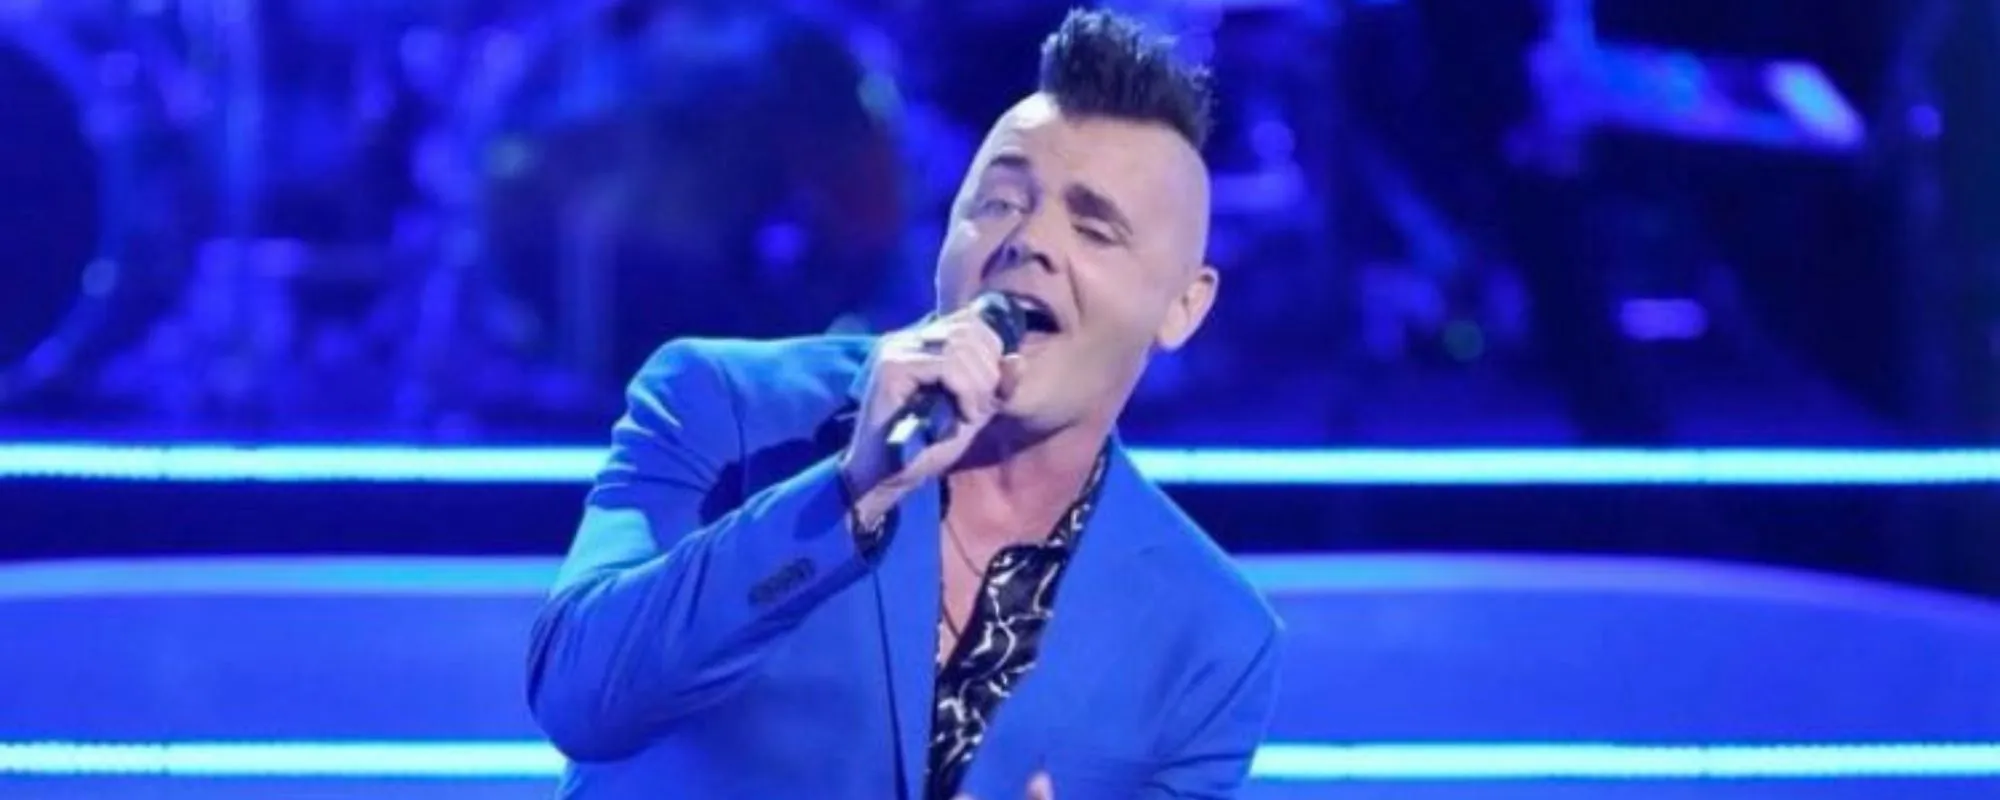 Bryan Olesen Channels Queen for Rocking Performance of “Don’t Stop Me Now” on ‘The Voice’